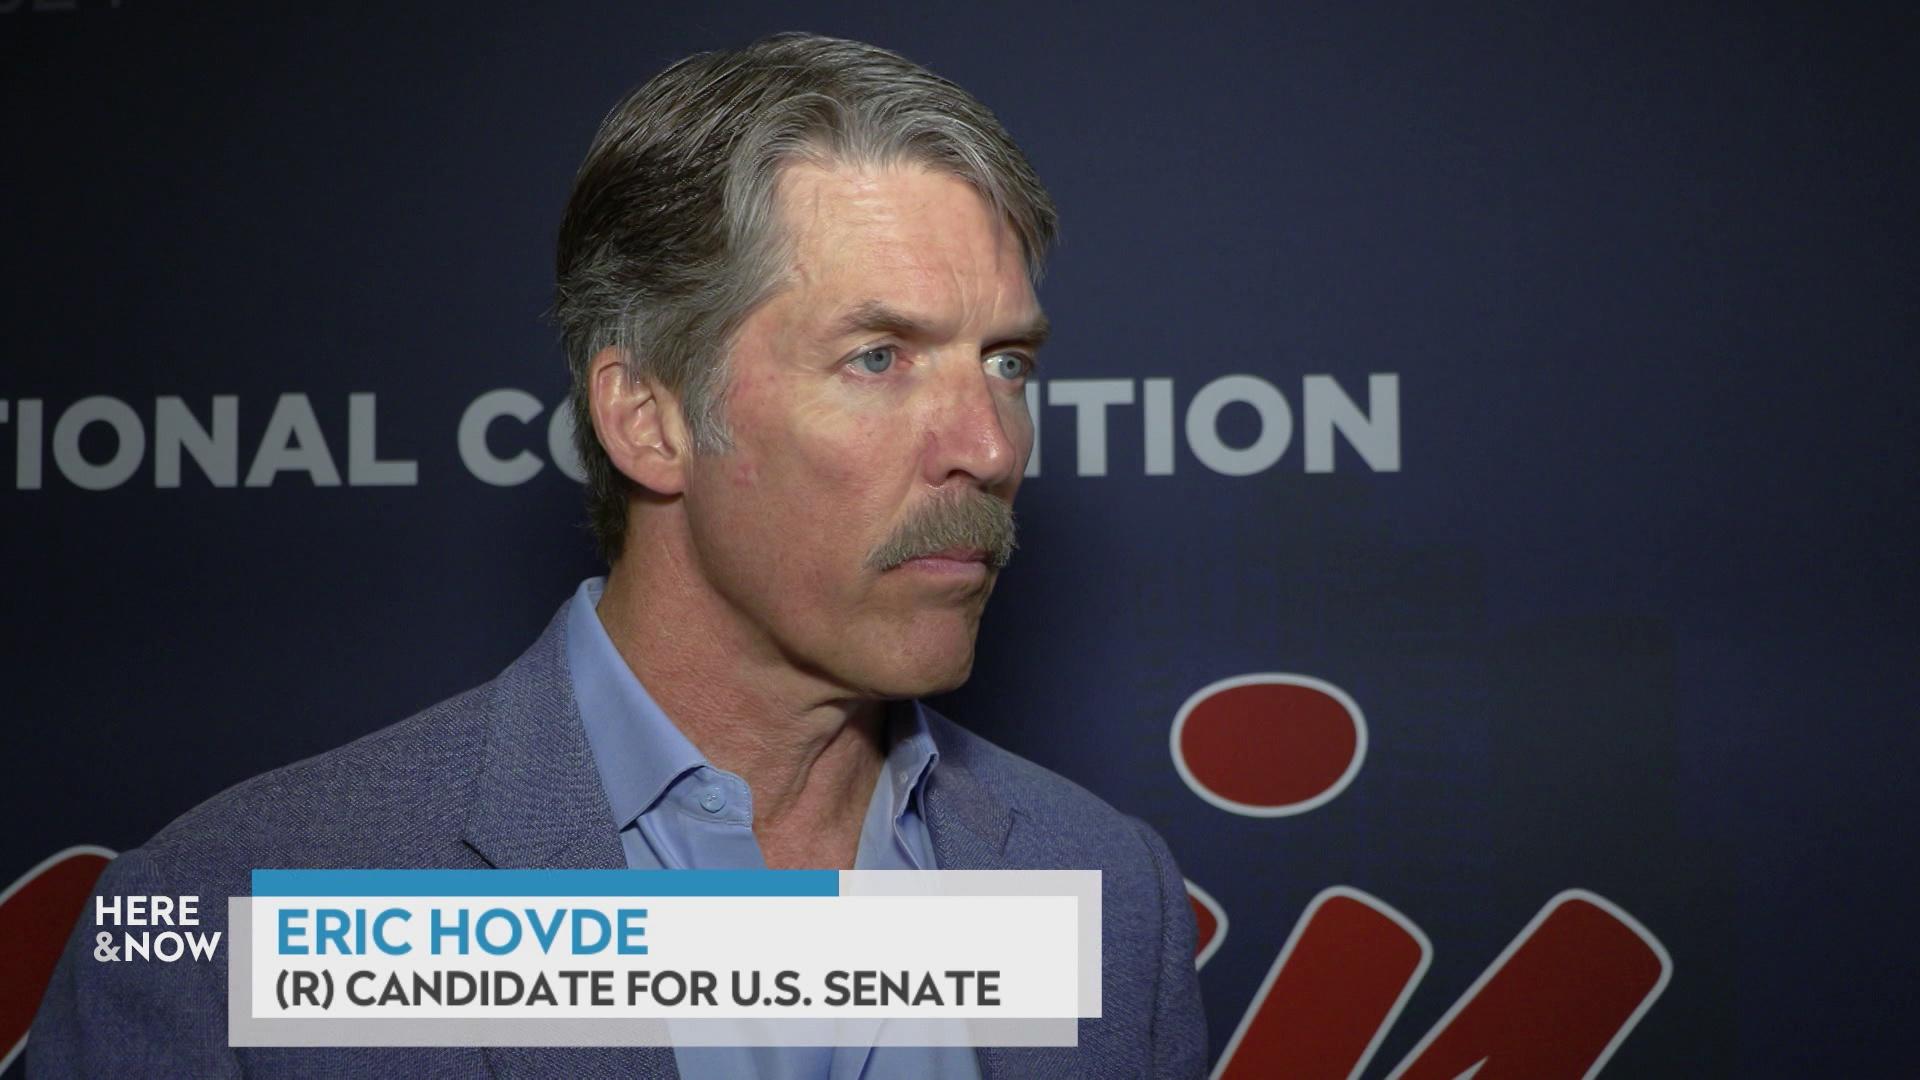 A still image shows Eric Hovde standing in front of a blue background with a graphic at bottom reading 'Eric Hovde' and '(R) Candidate for U.S. Senate.'